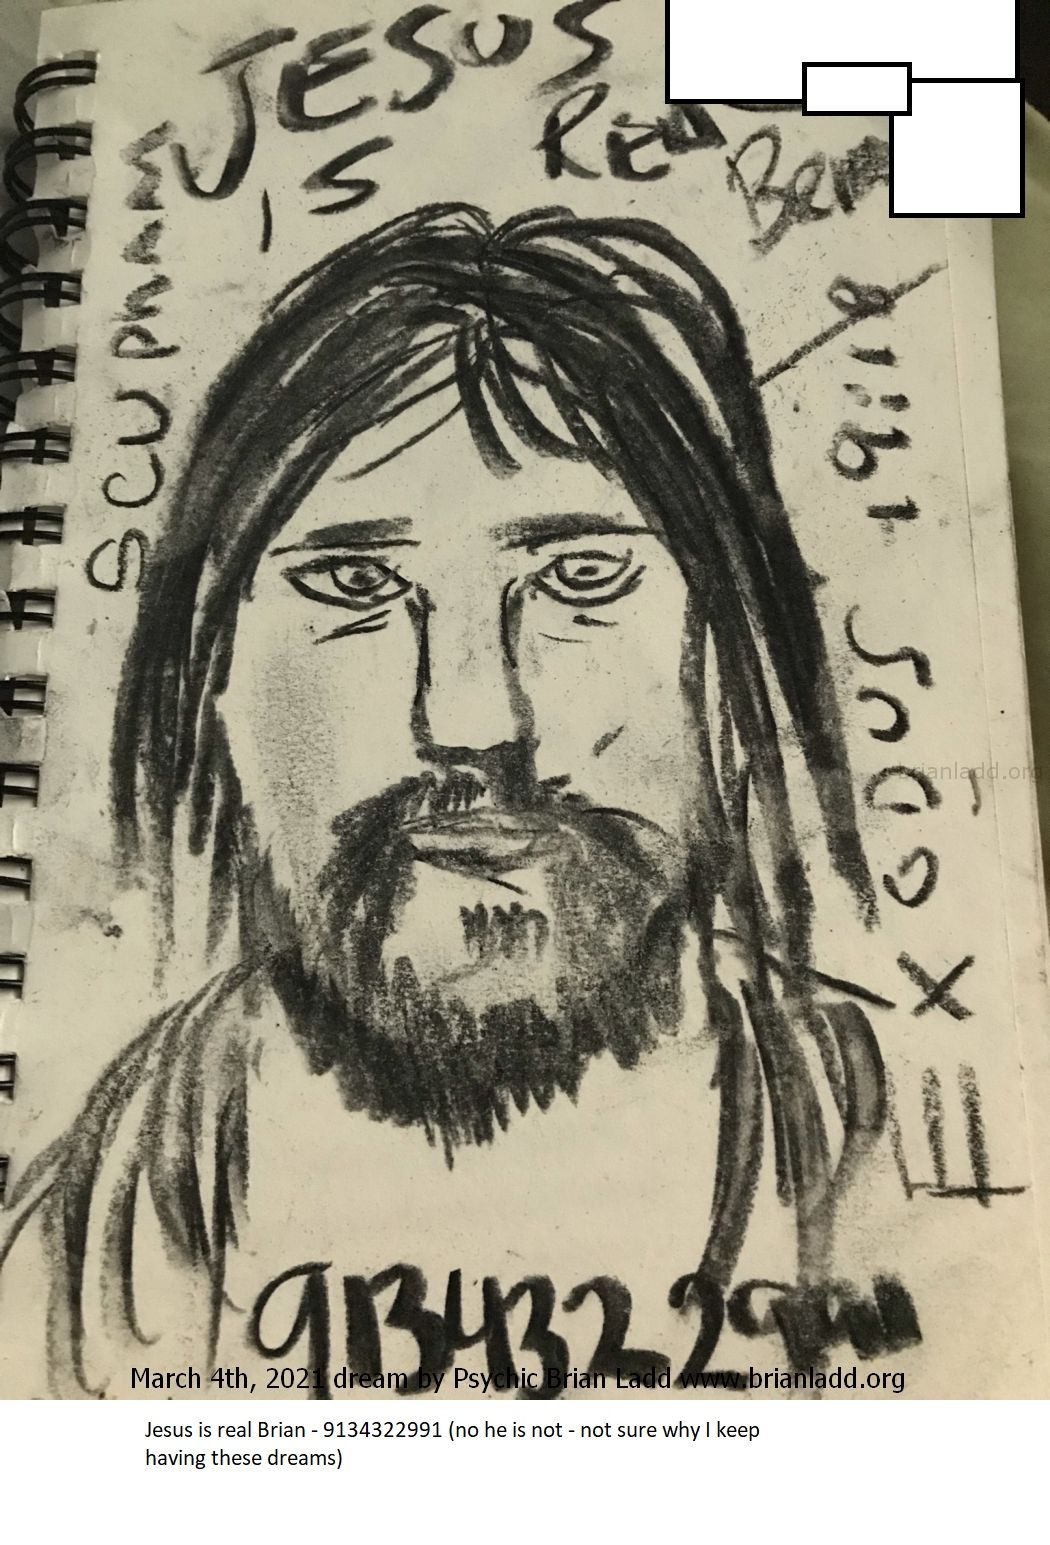 14561 3 March 2021 4 - Jesus Is Real Brian - 9134322991 (no He Is Not - Not Sure Why I Keep Having These Dreams) Exodus ...
Jesus Is Real Brian - 9134322991 (no He Is Not - Not Sure Why I Keep Having These Dreams) Exodus 19:19
